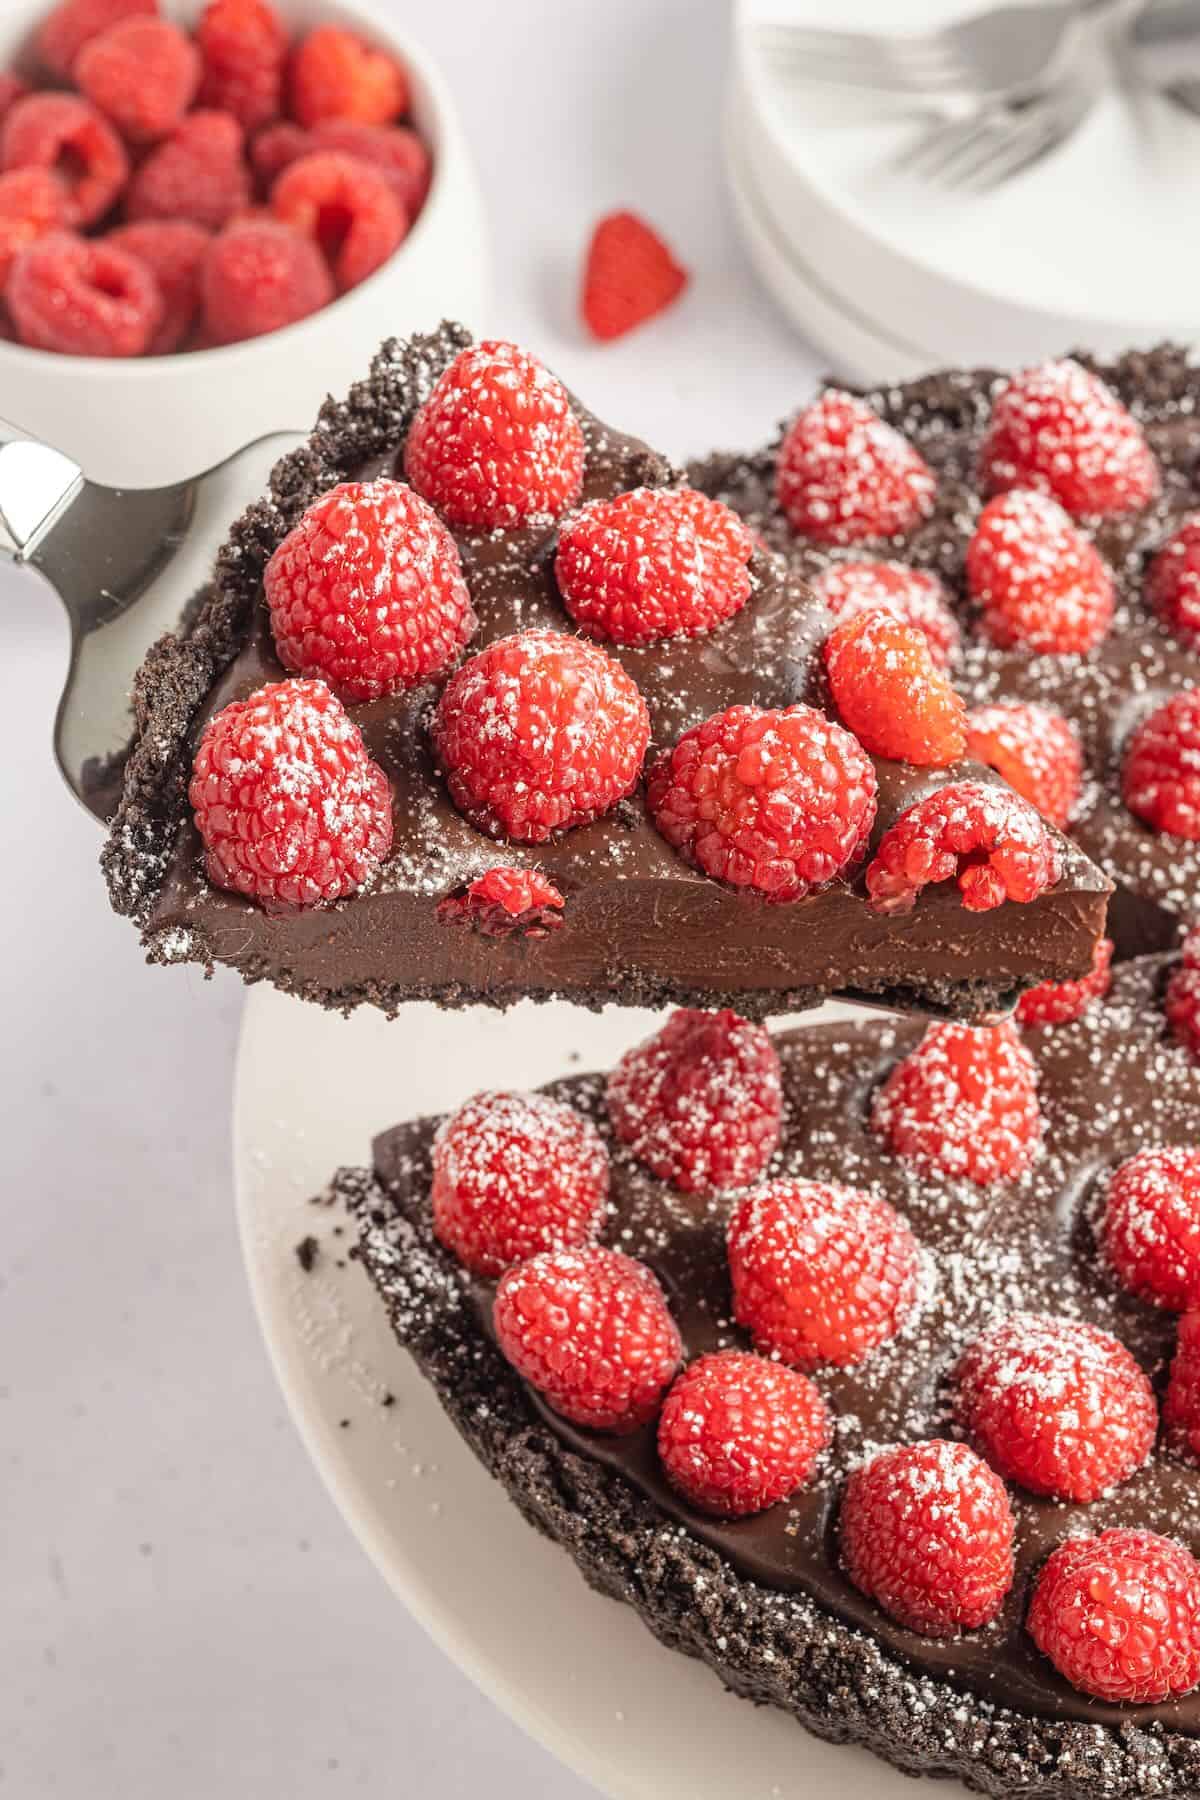 A slice of chocolate raspberry tart topped with powdered sugar.